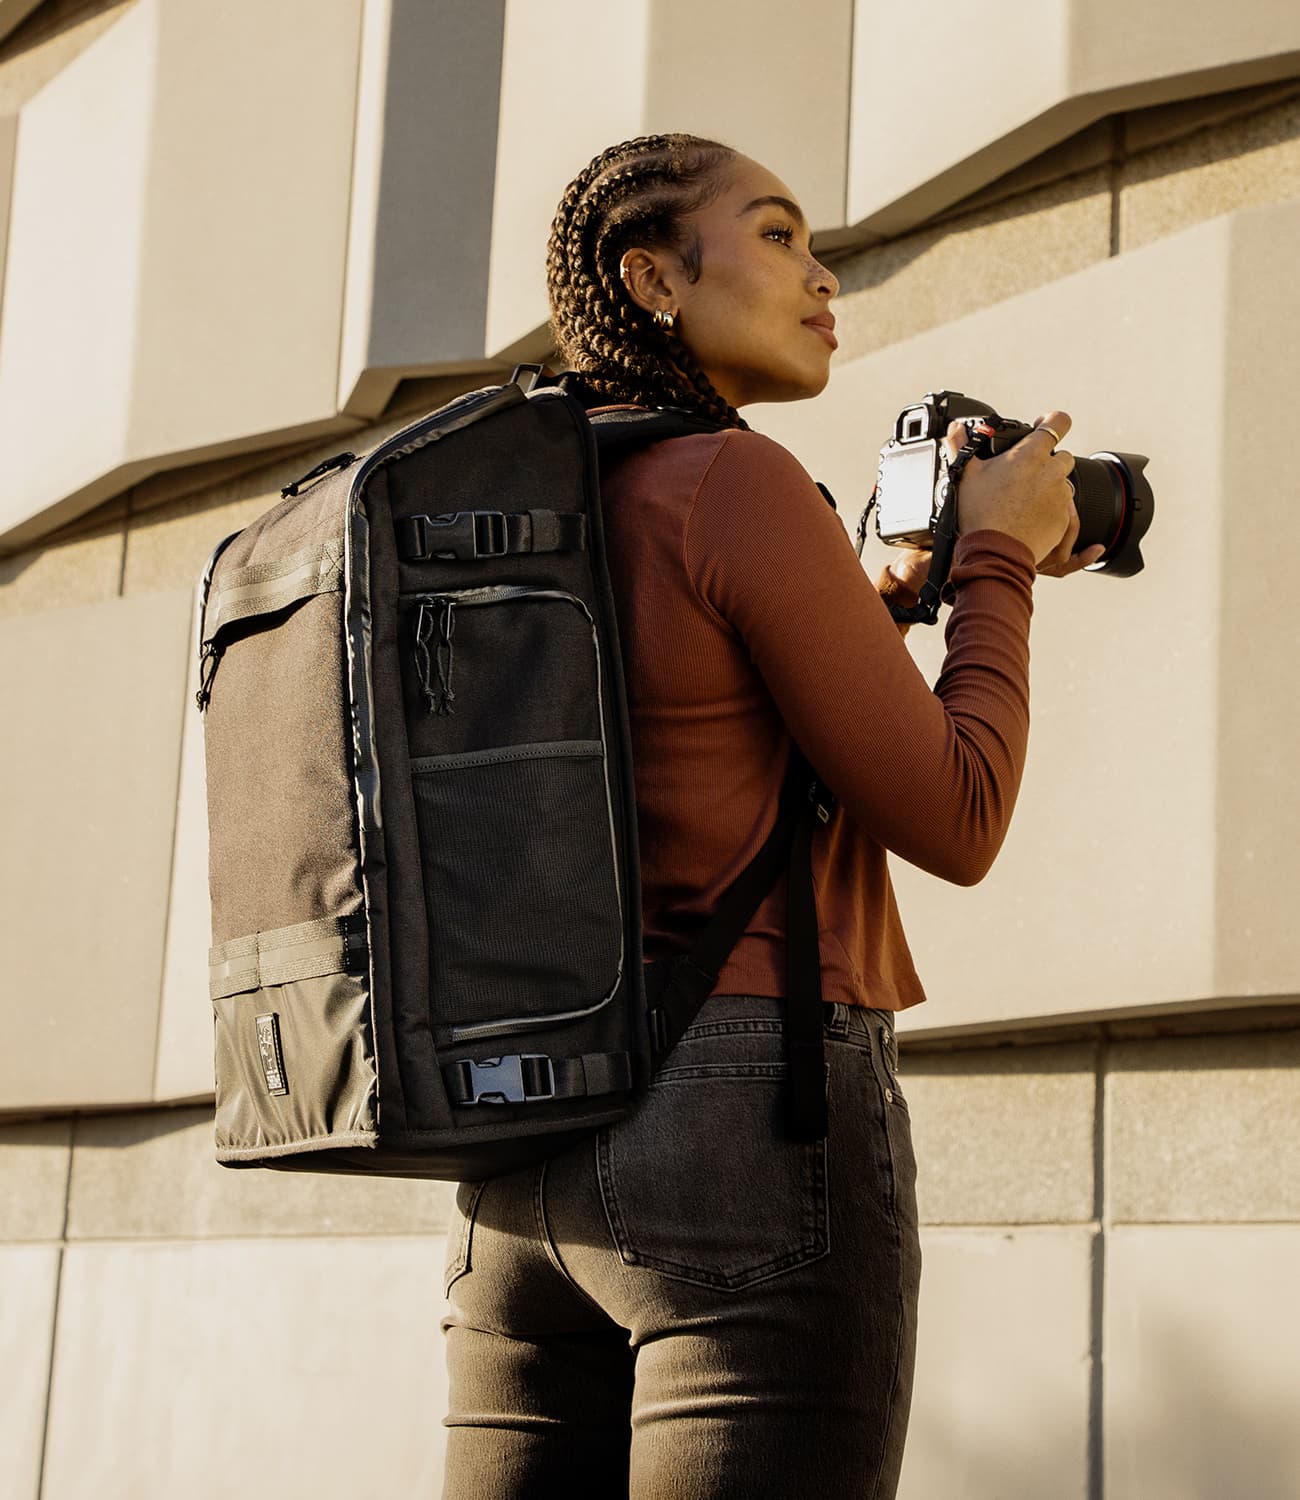 Niko Camera Backpack worn by a photographer mobile image size